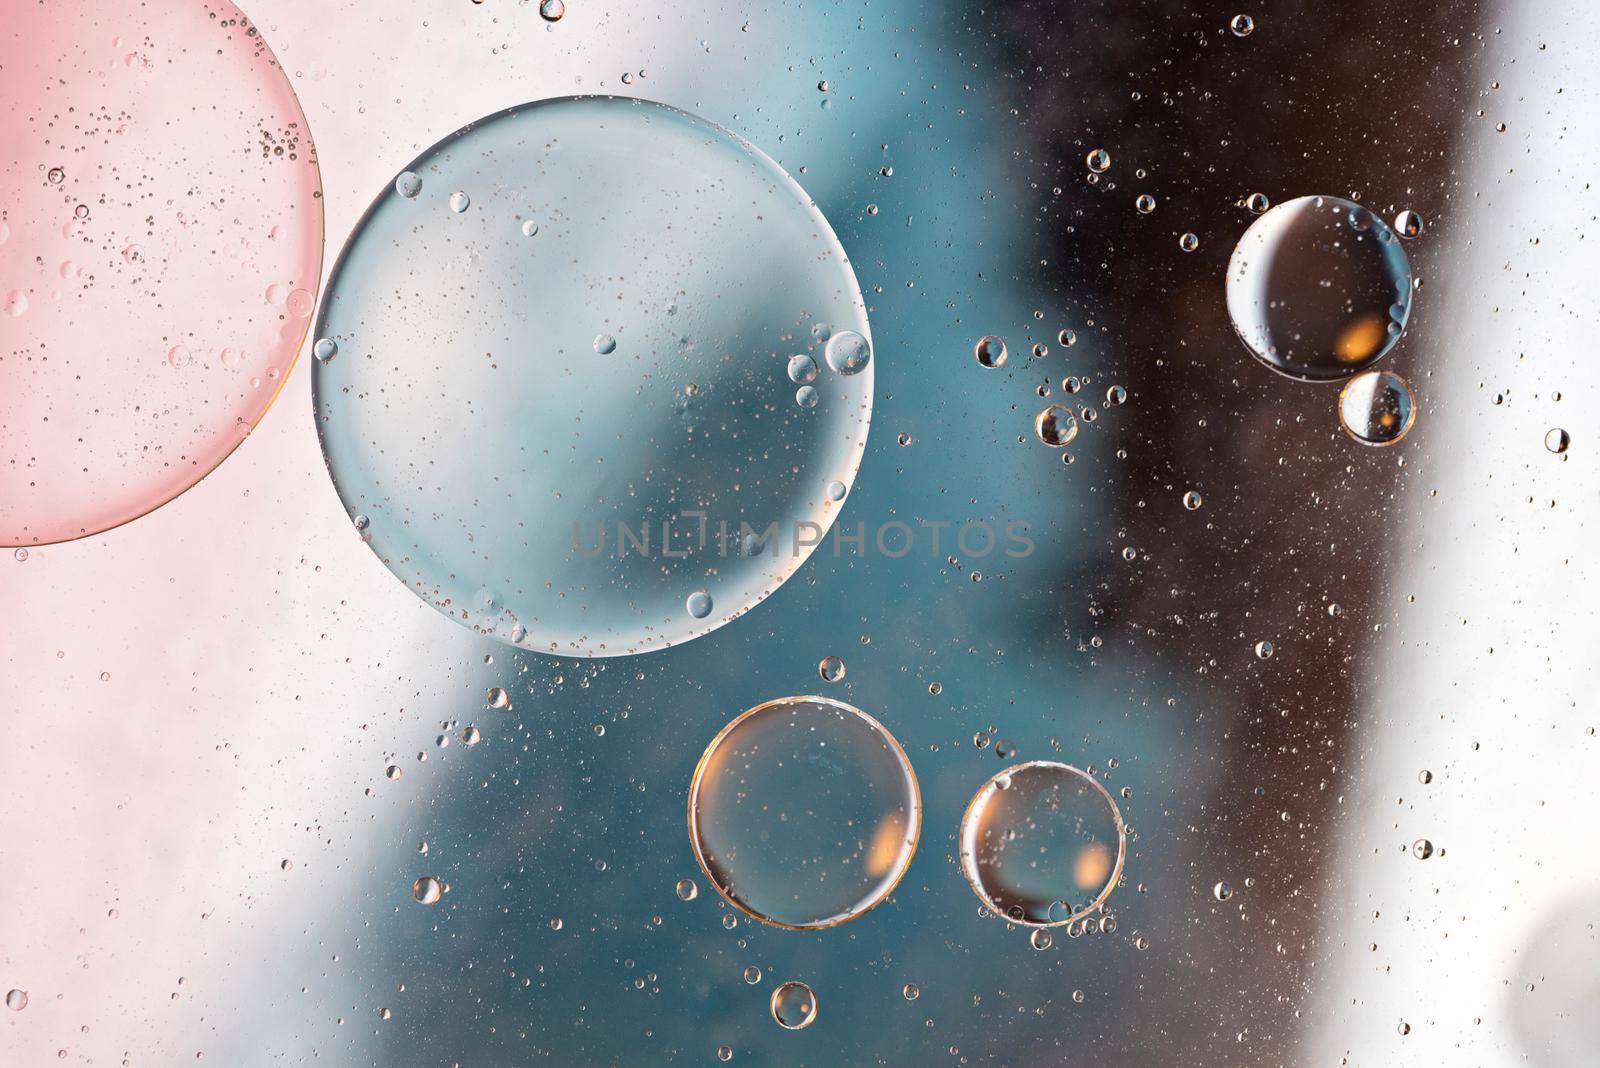 Colorful abstract background with oil drops on water by anytka